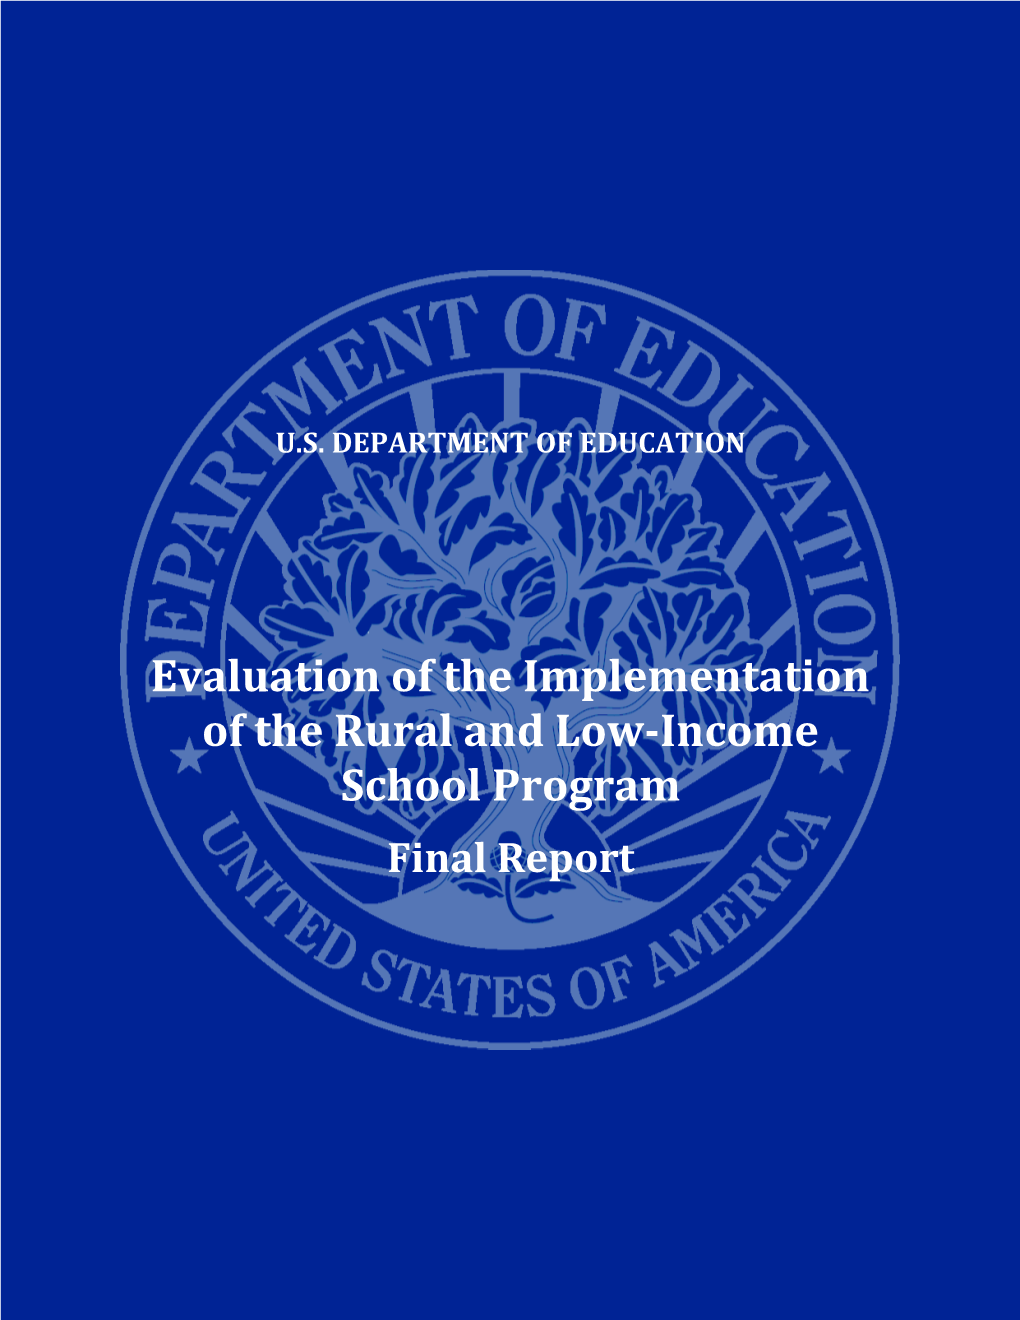 Evaluation of the Implementation of the Rural and Low-Income School Program: Final Report